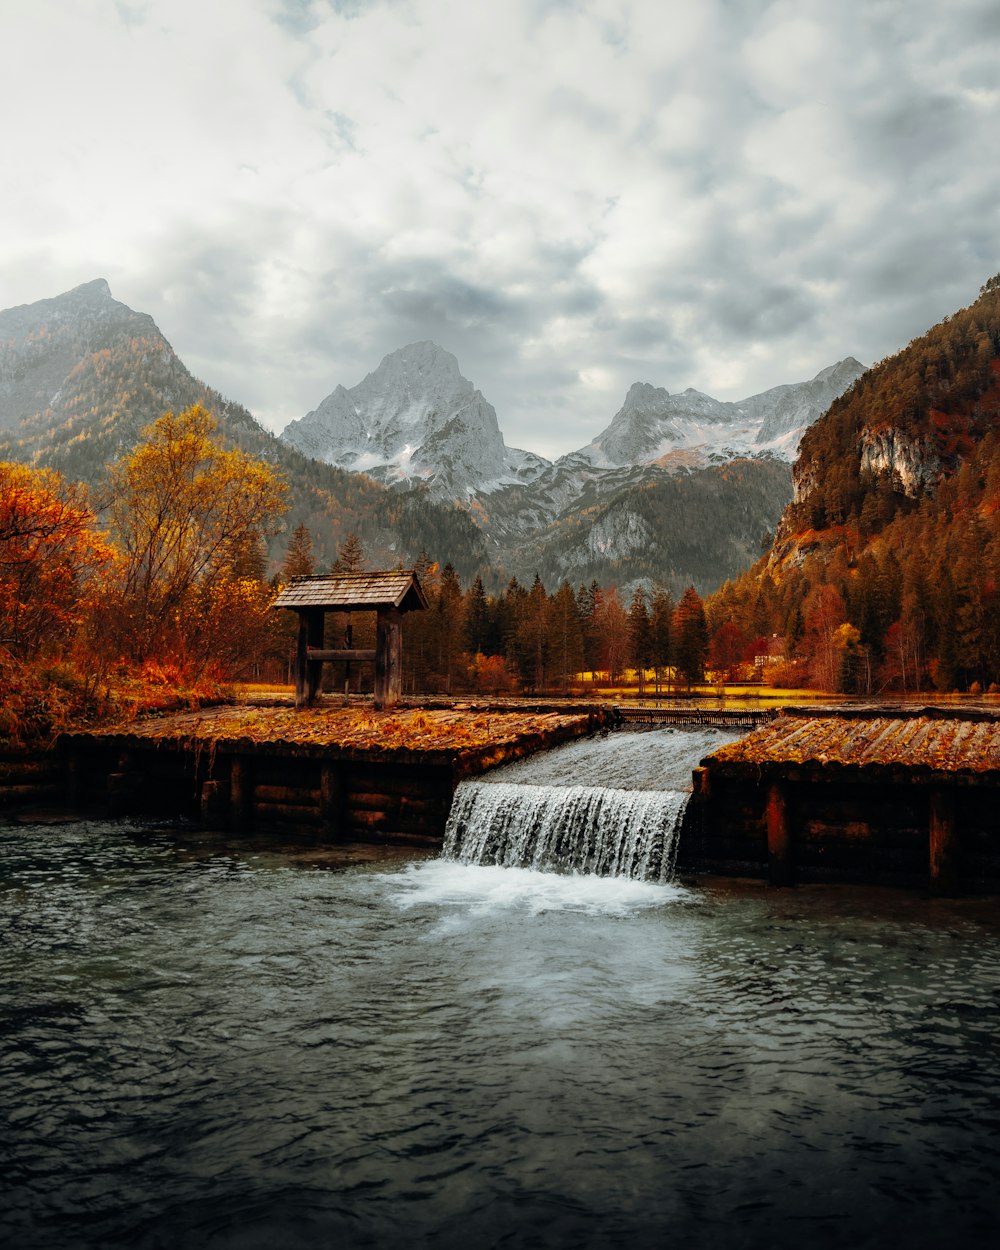 a small building on a bridge over a river with mountains in the background